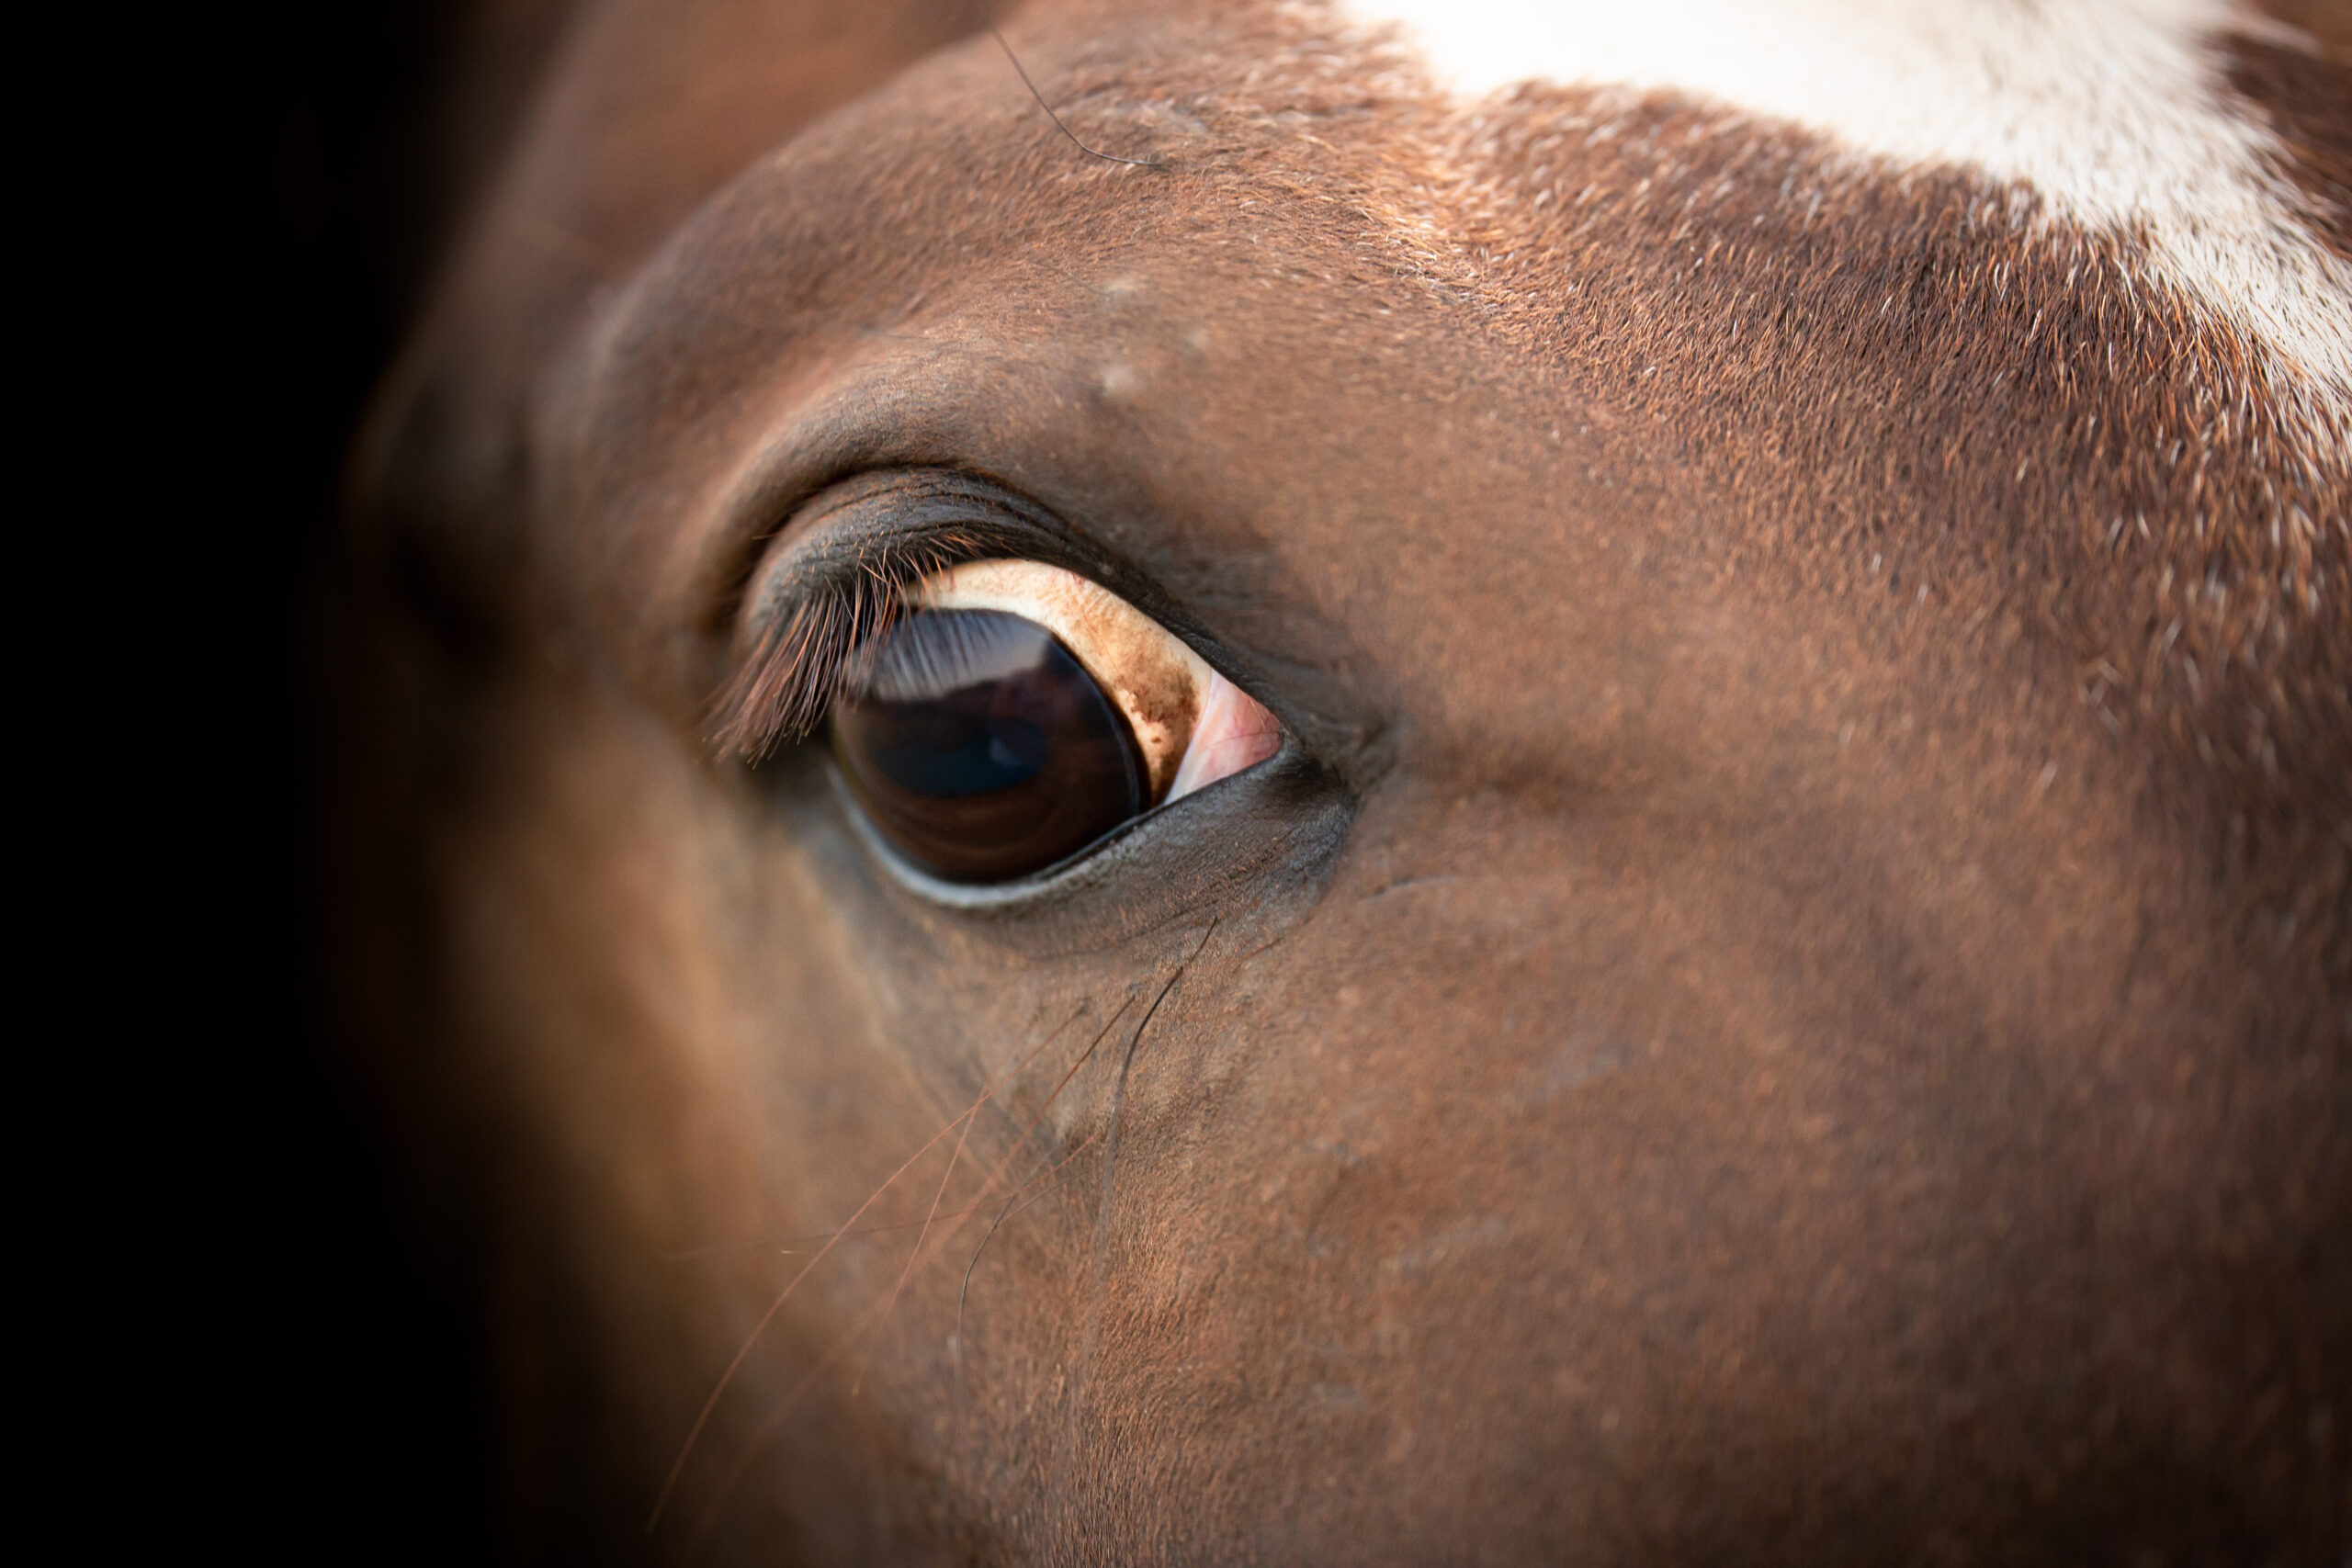 Do’s and Don’ts in dealing with a nervous horse